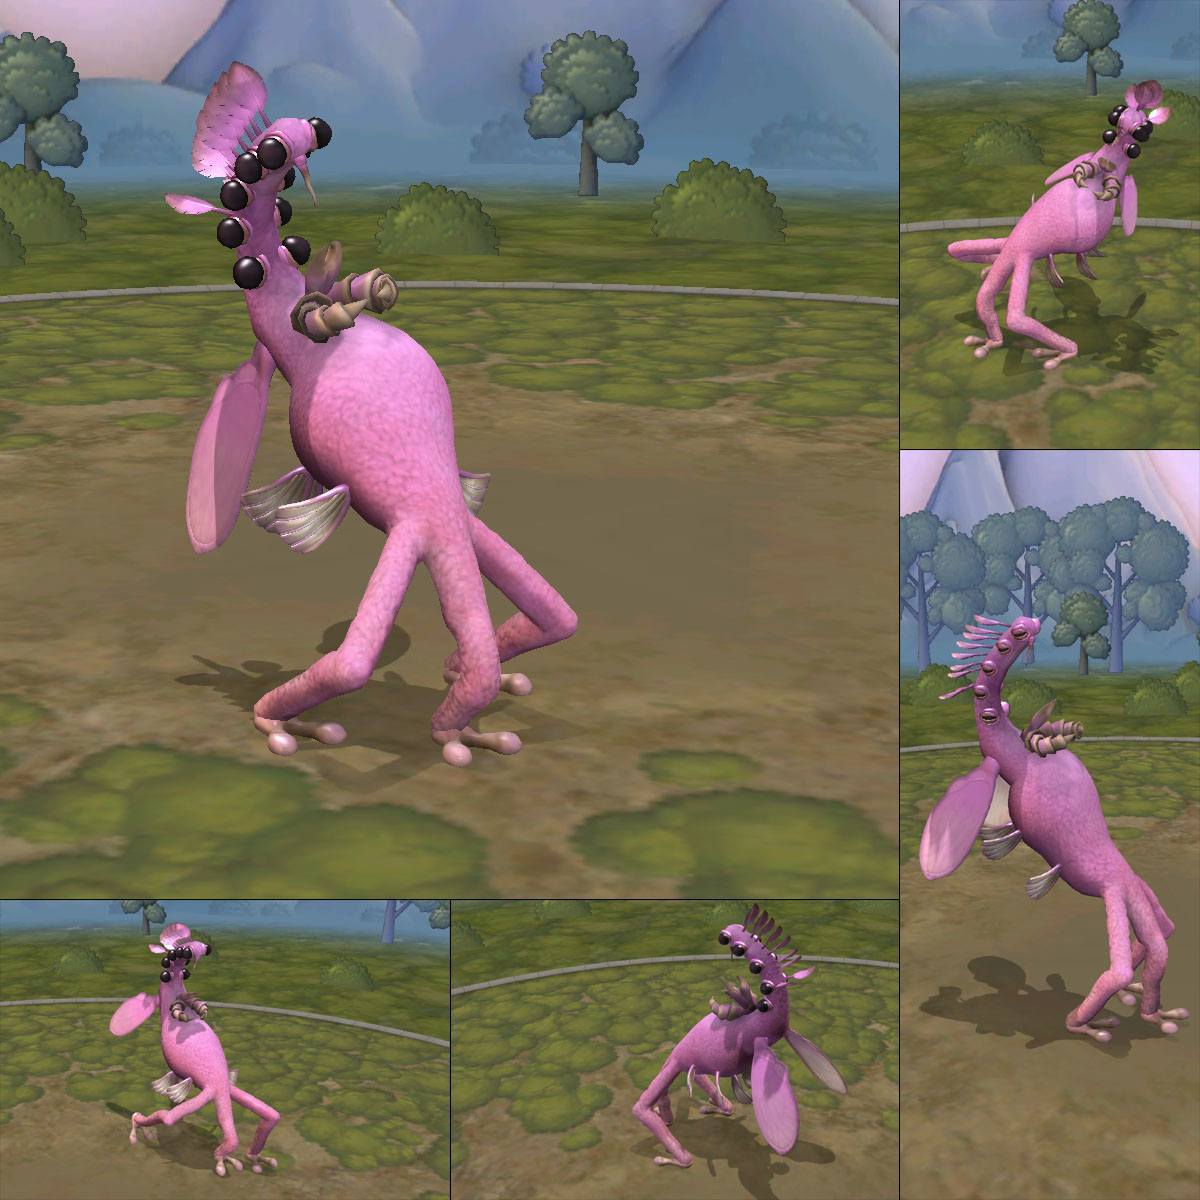 move spore creations to new computer